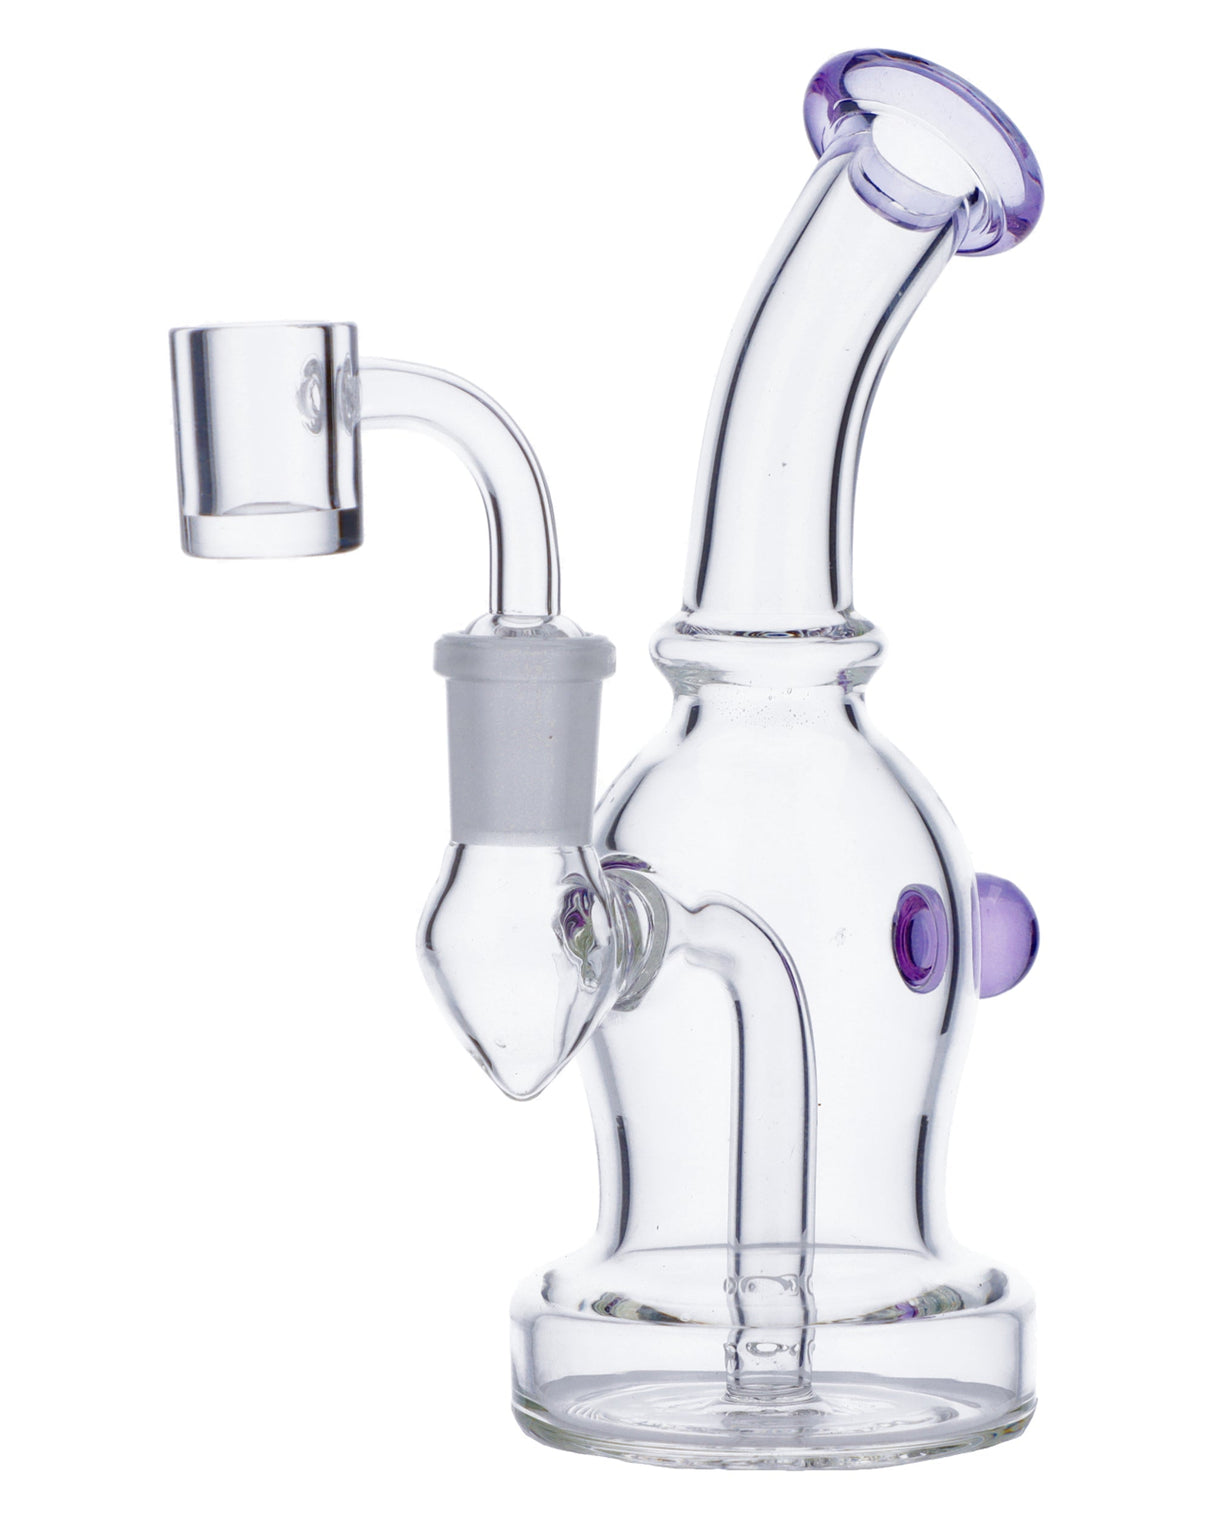 Quartz Banger Dab Rig by Valiant Distribution, 7" height, with 90-degree joint and purple accents